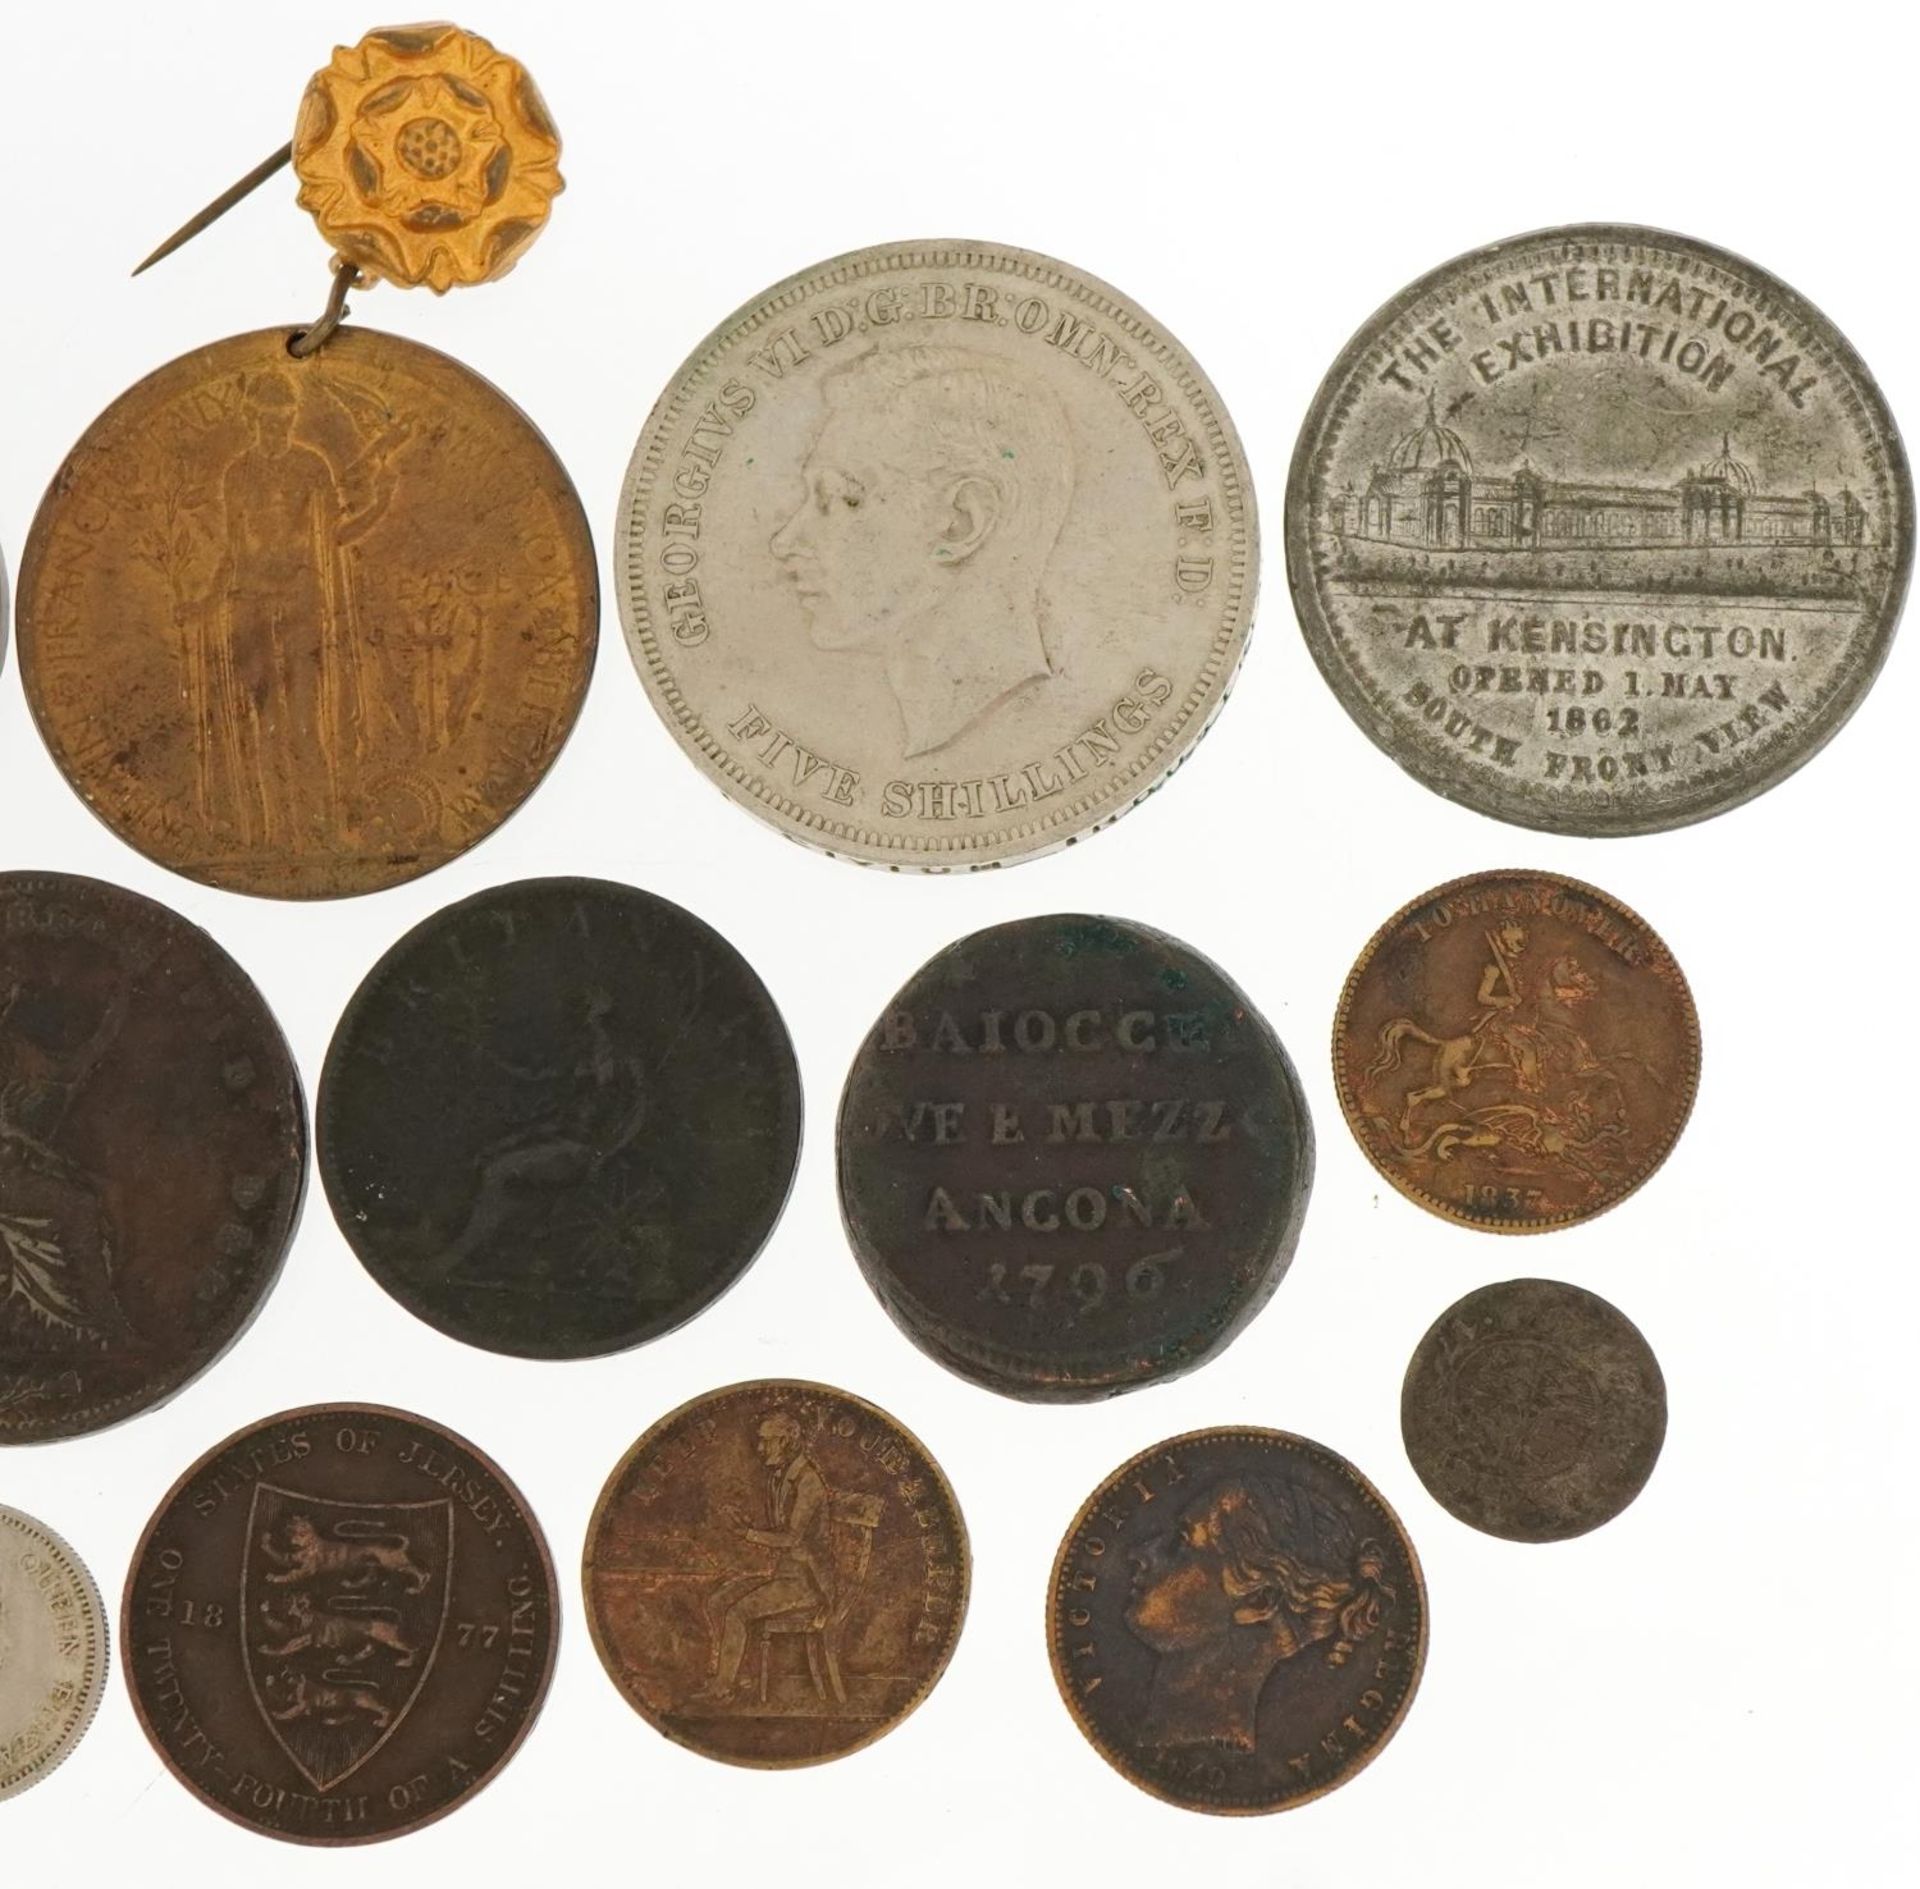 Early 19th century and later British and World coinage, medals and medallions including The - Image 3 of 3